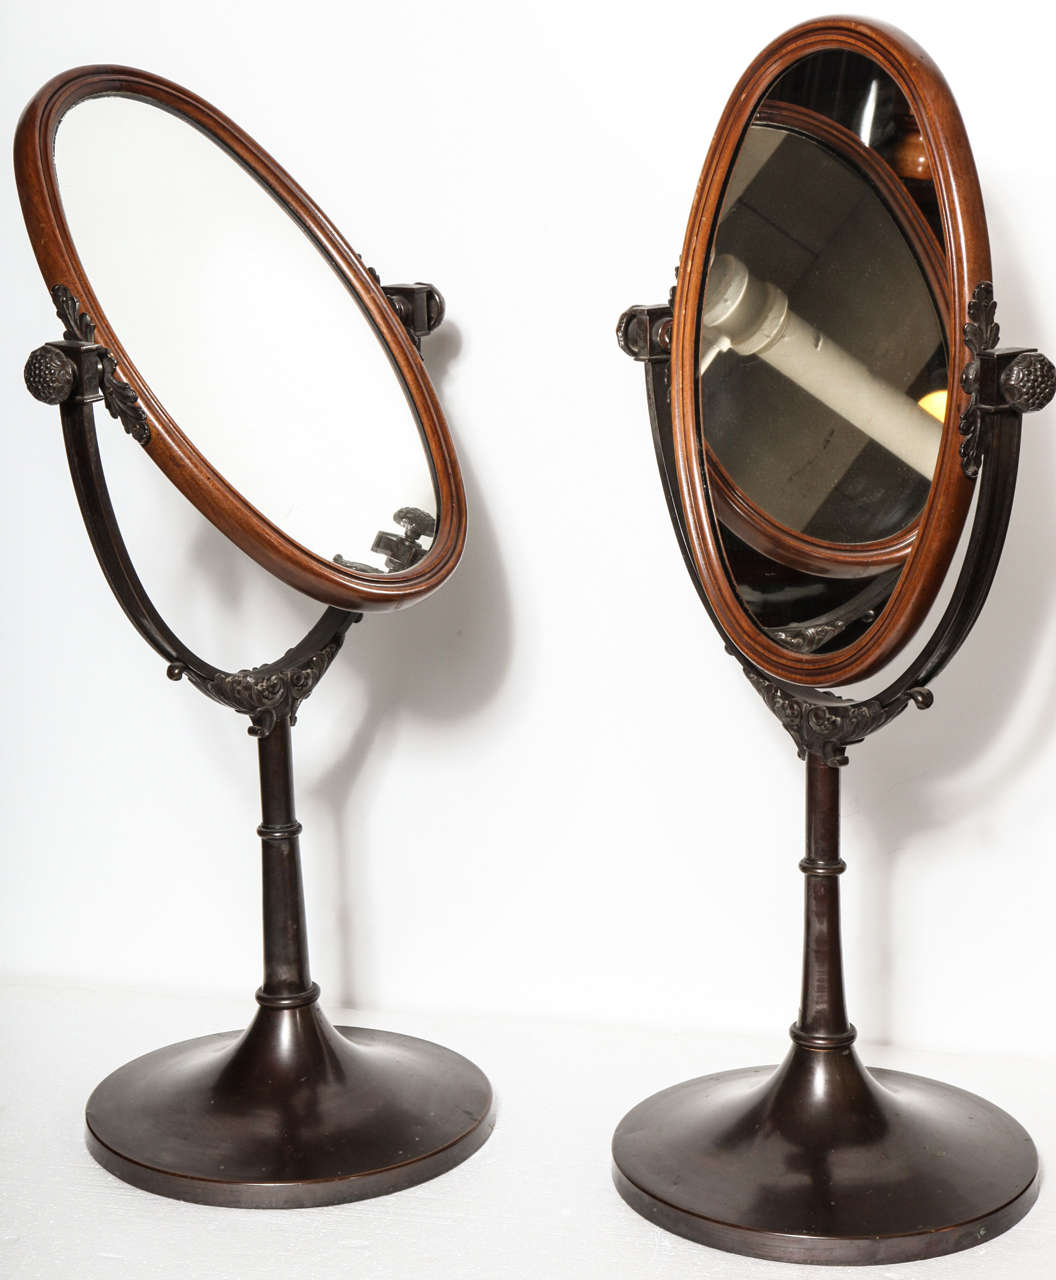 English, Bronze and Wood Miniature Cheval Mirrors